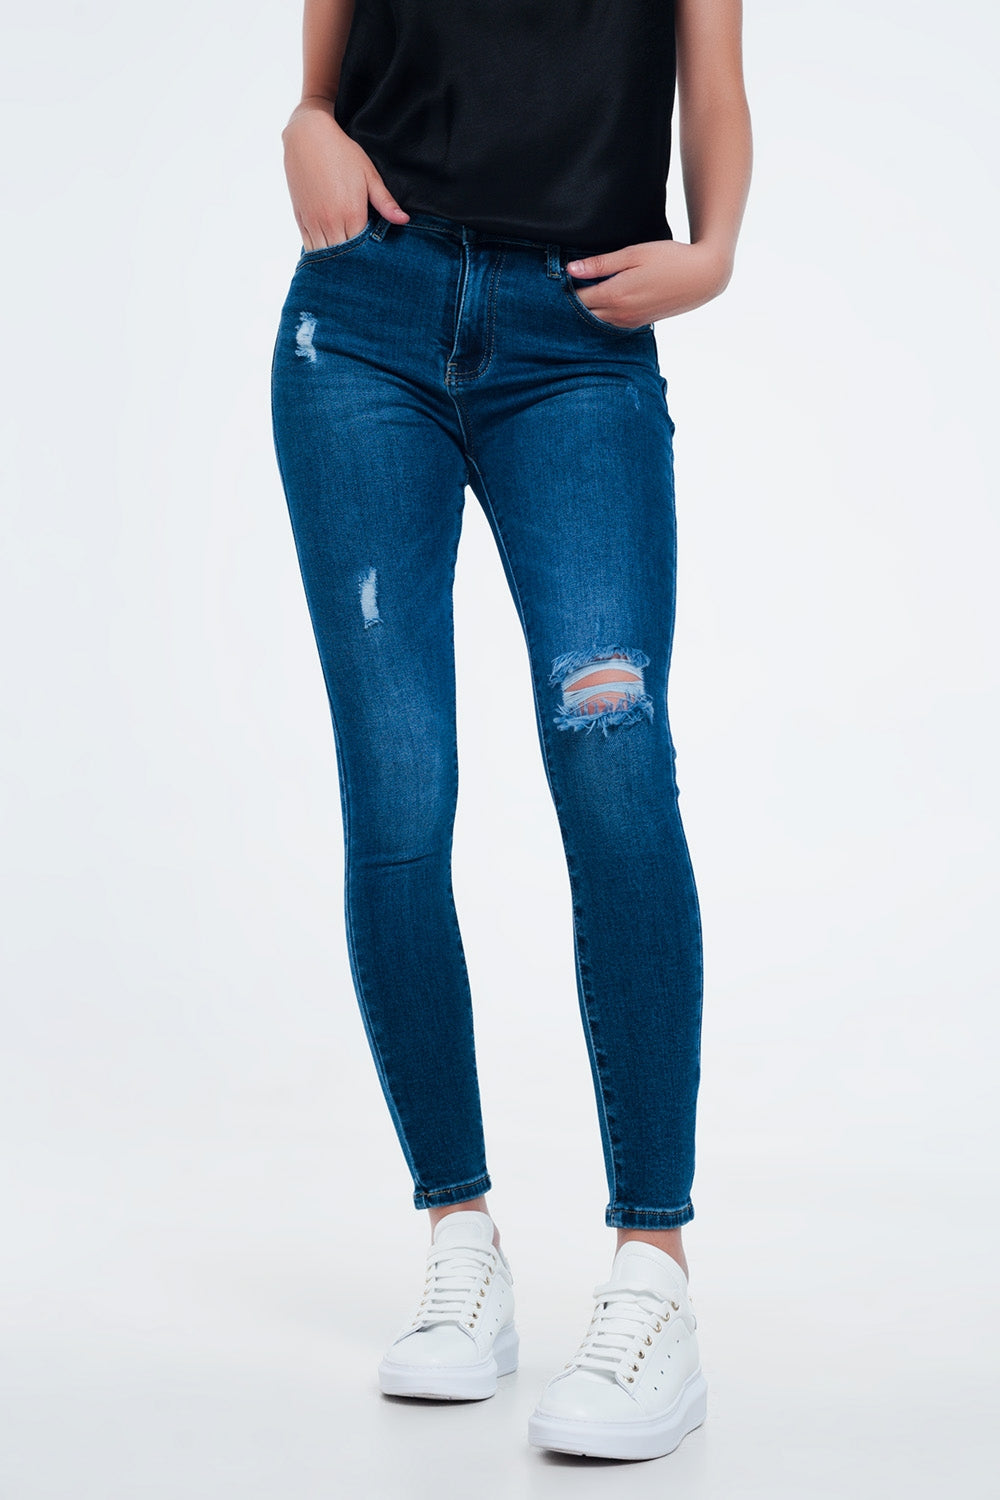 Q2 Distressed skinny fit jeans in mid wash